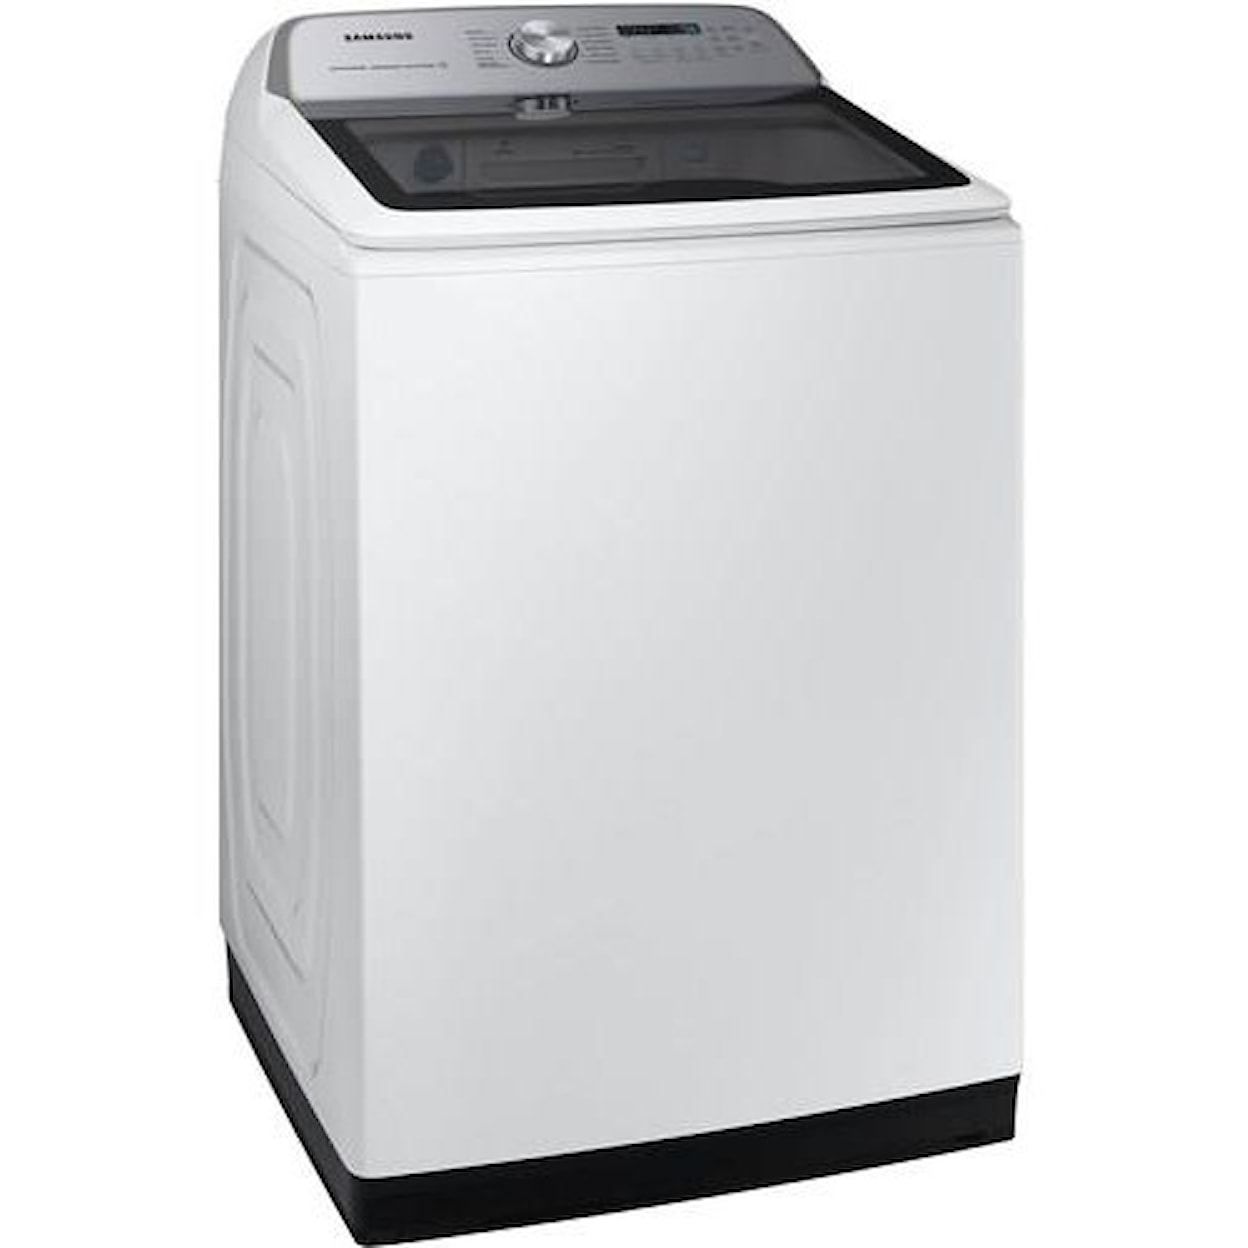 Samsung Appliances Laundry Traditional Top Load Washer